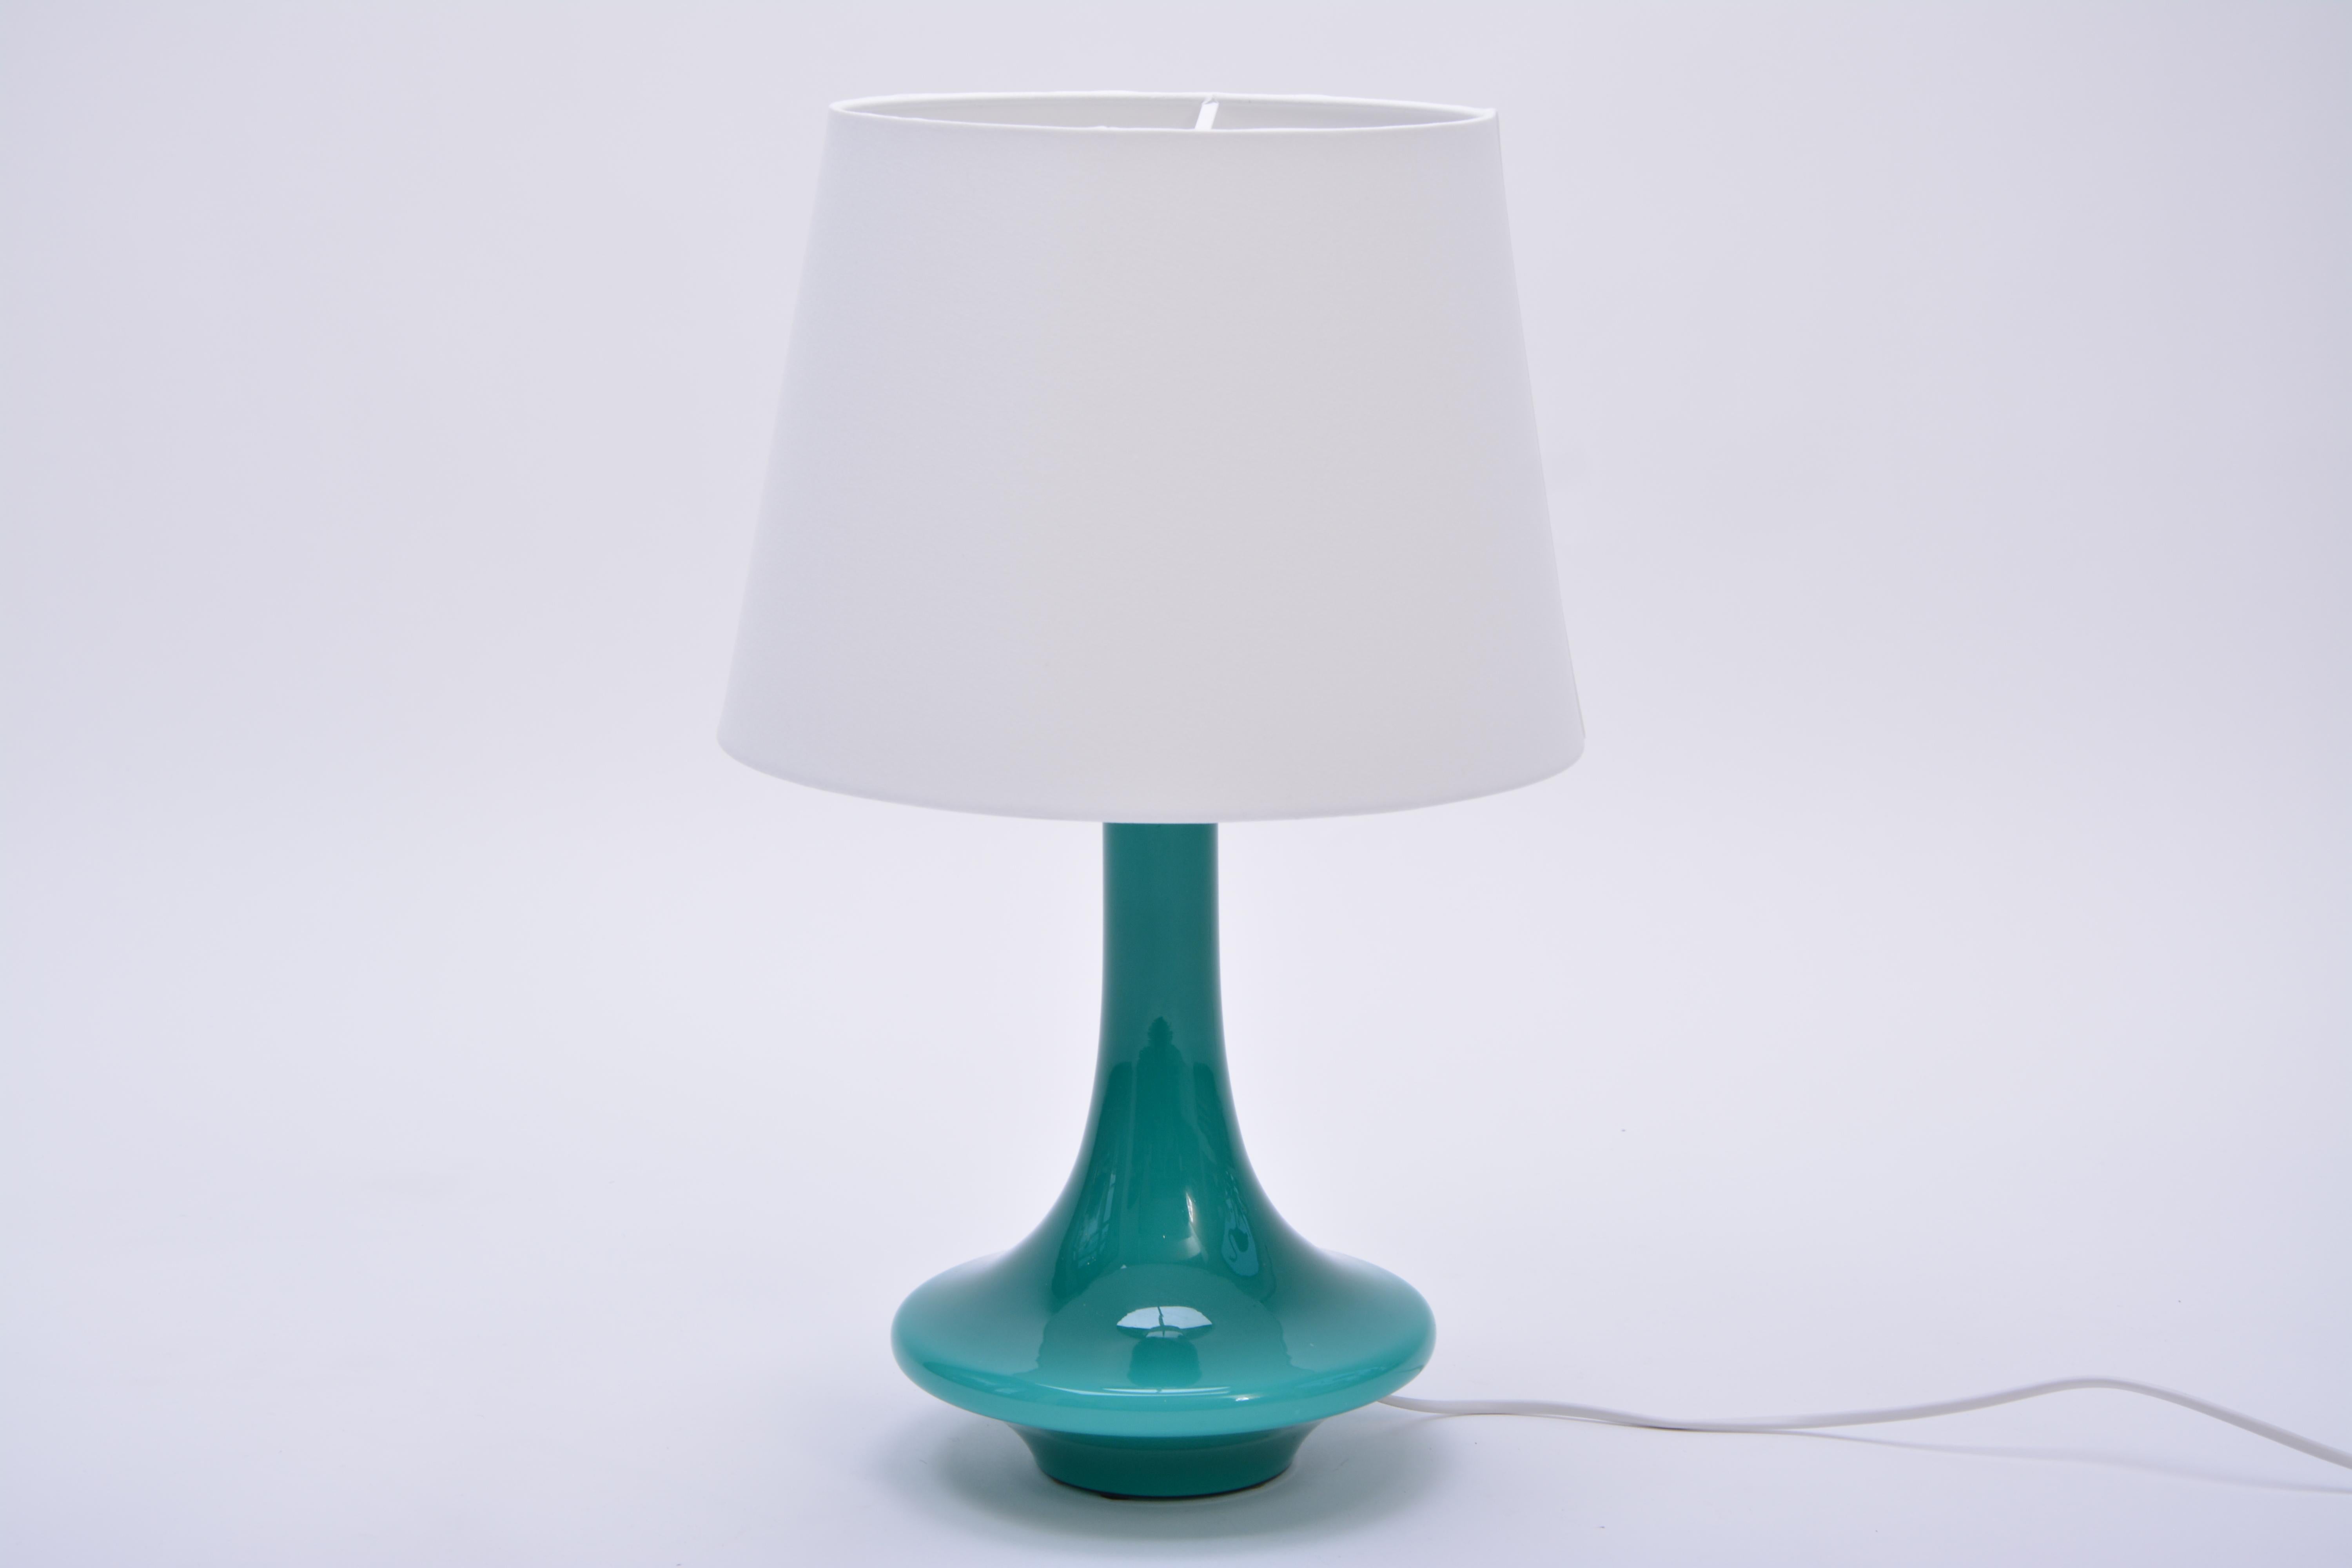 Scandinavian Mid-Century Modern Green Glass table lamp
Hand made glass table lamp in a gorgeous green color produced in Scandinavia in the 1960s.
The lamp has been rewired for European use and has a new shade. To be checked by a local electrician